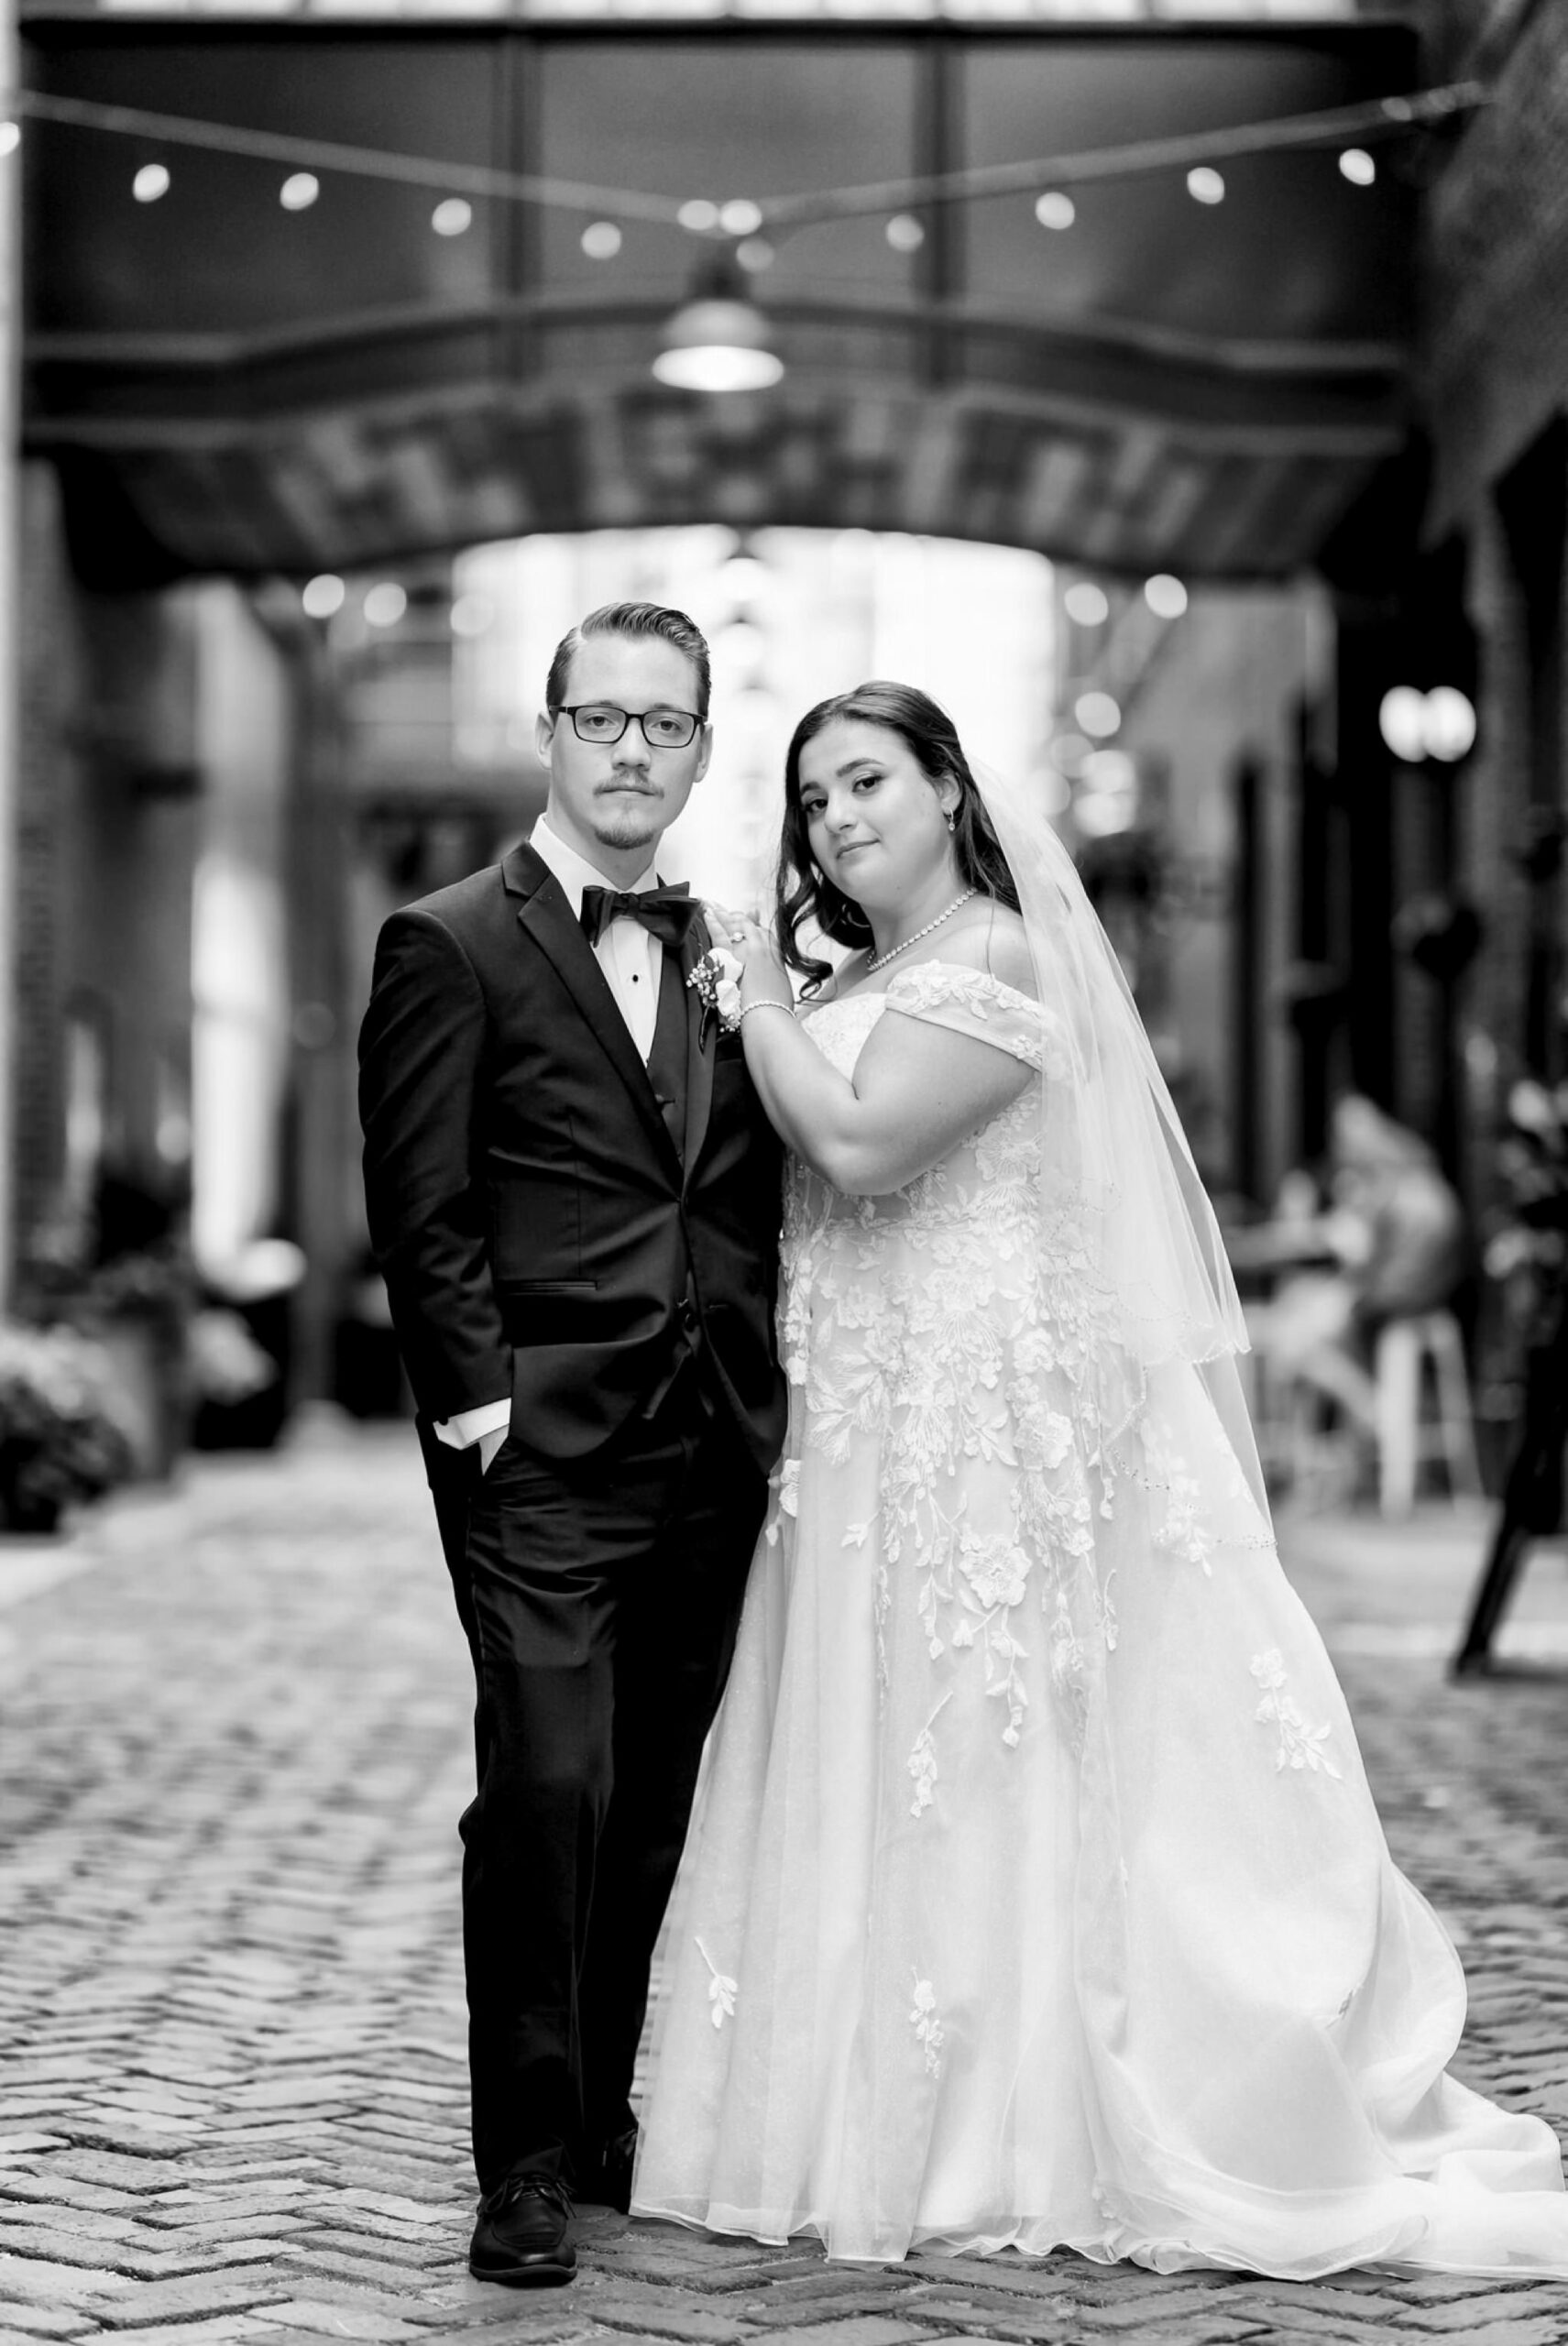 A bride and groom pose stoically on their wedding day in Parker's Alley.  